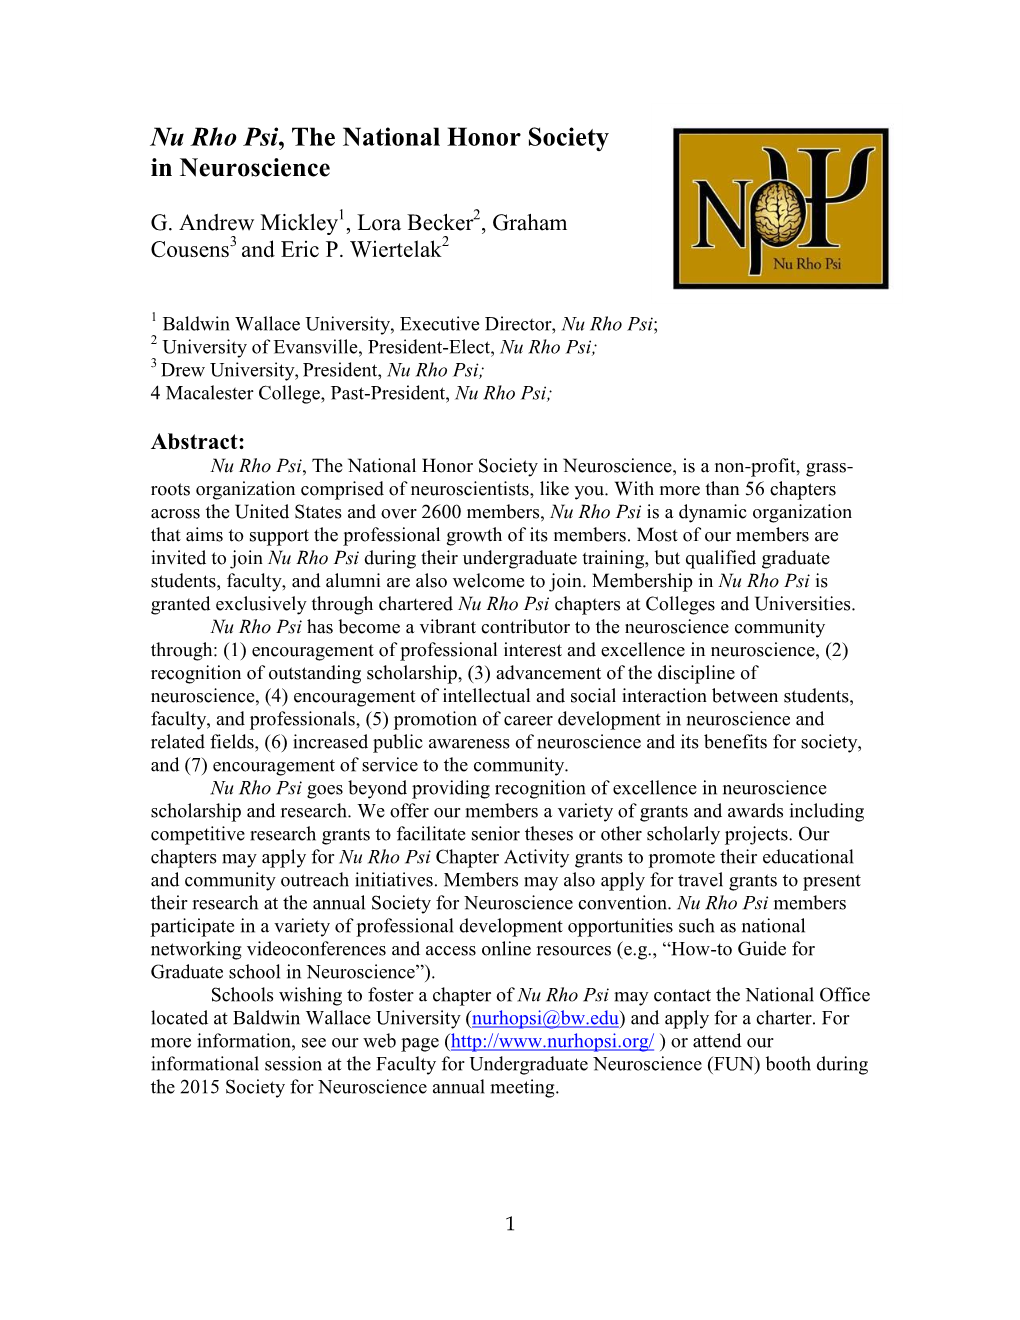 Nu Rho Psi, the National Honor Society in Neuroscience